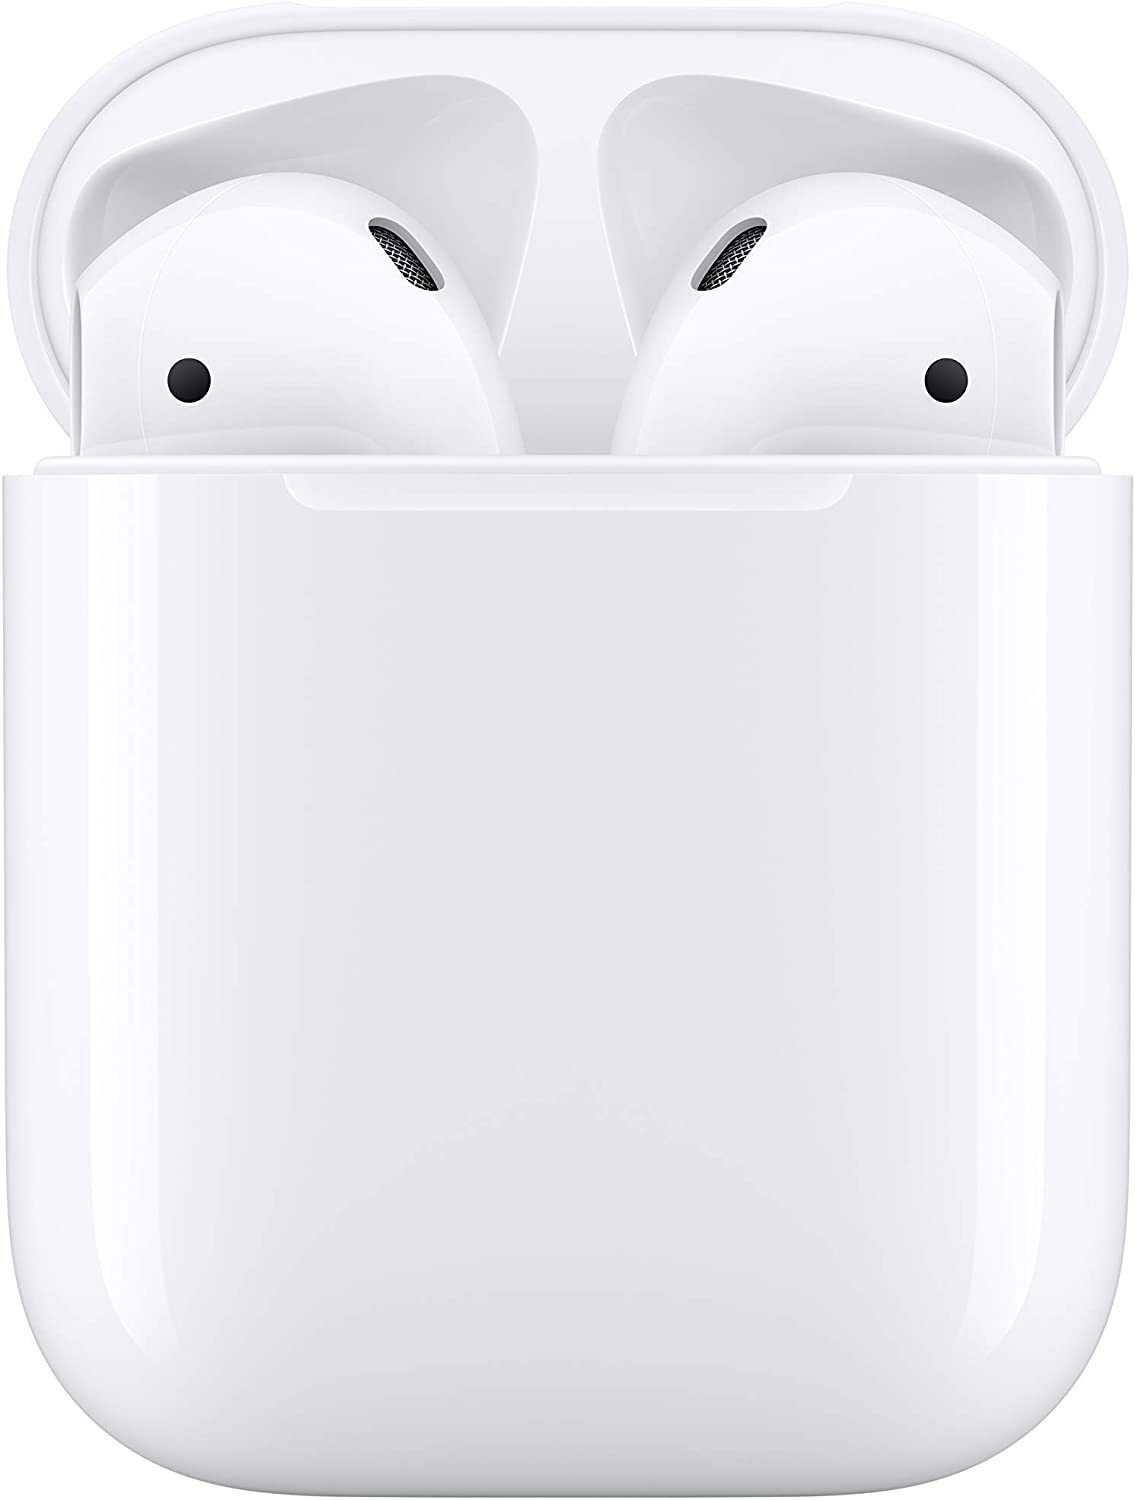 Primary image for Apple AirPods 2 with Charging Case - White (Renewed)